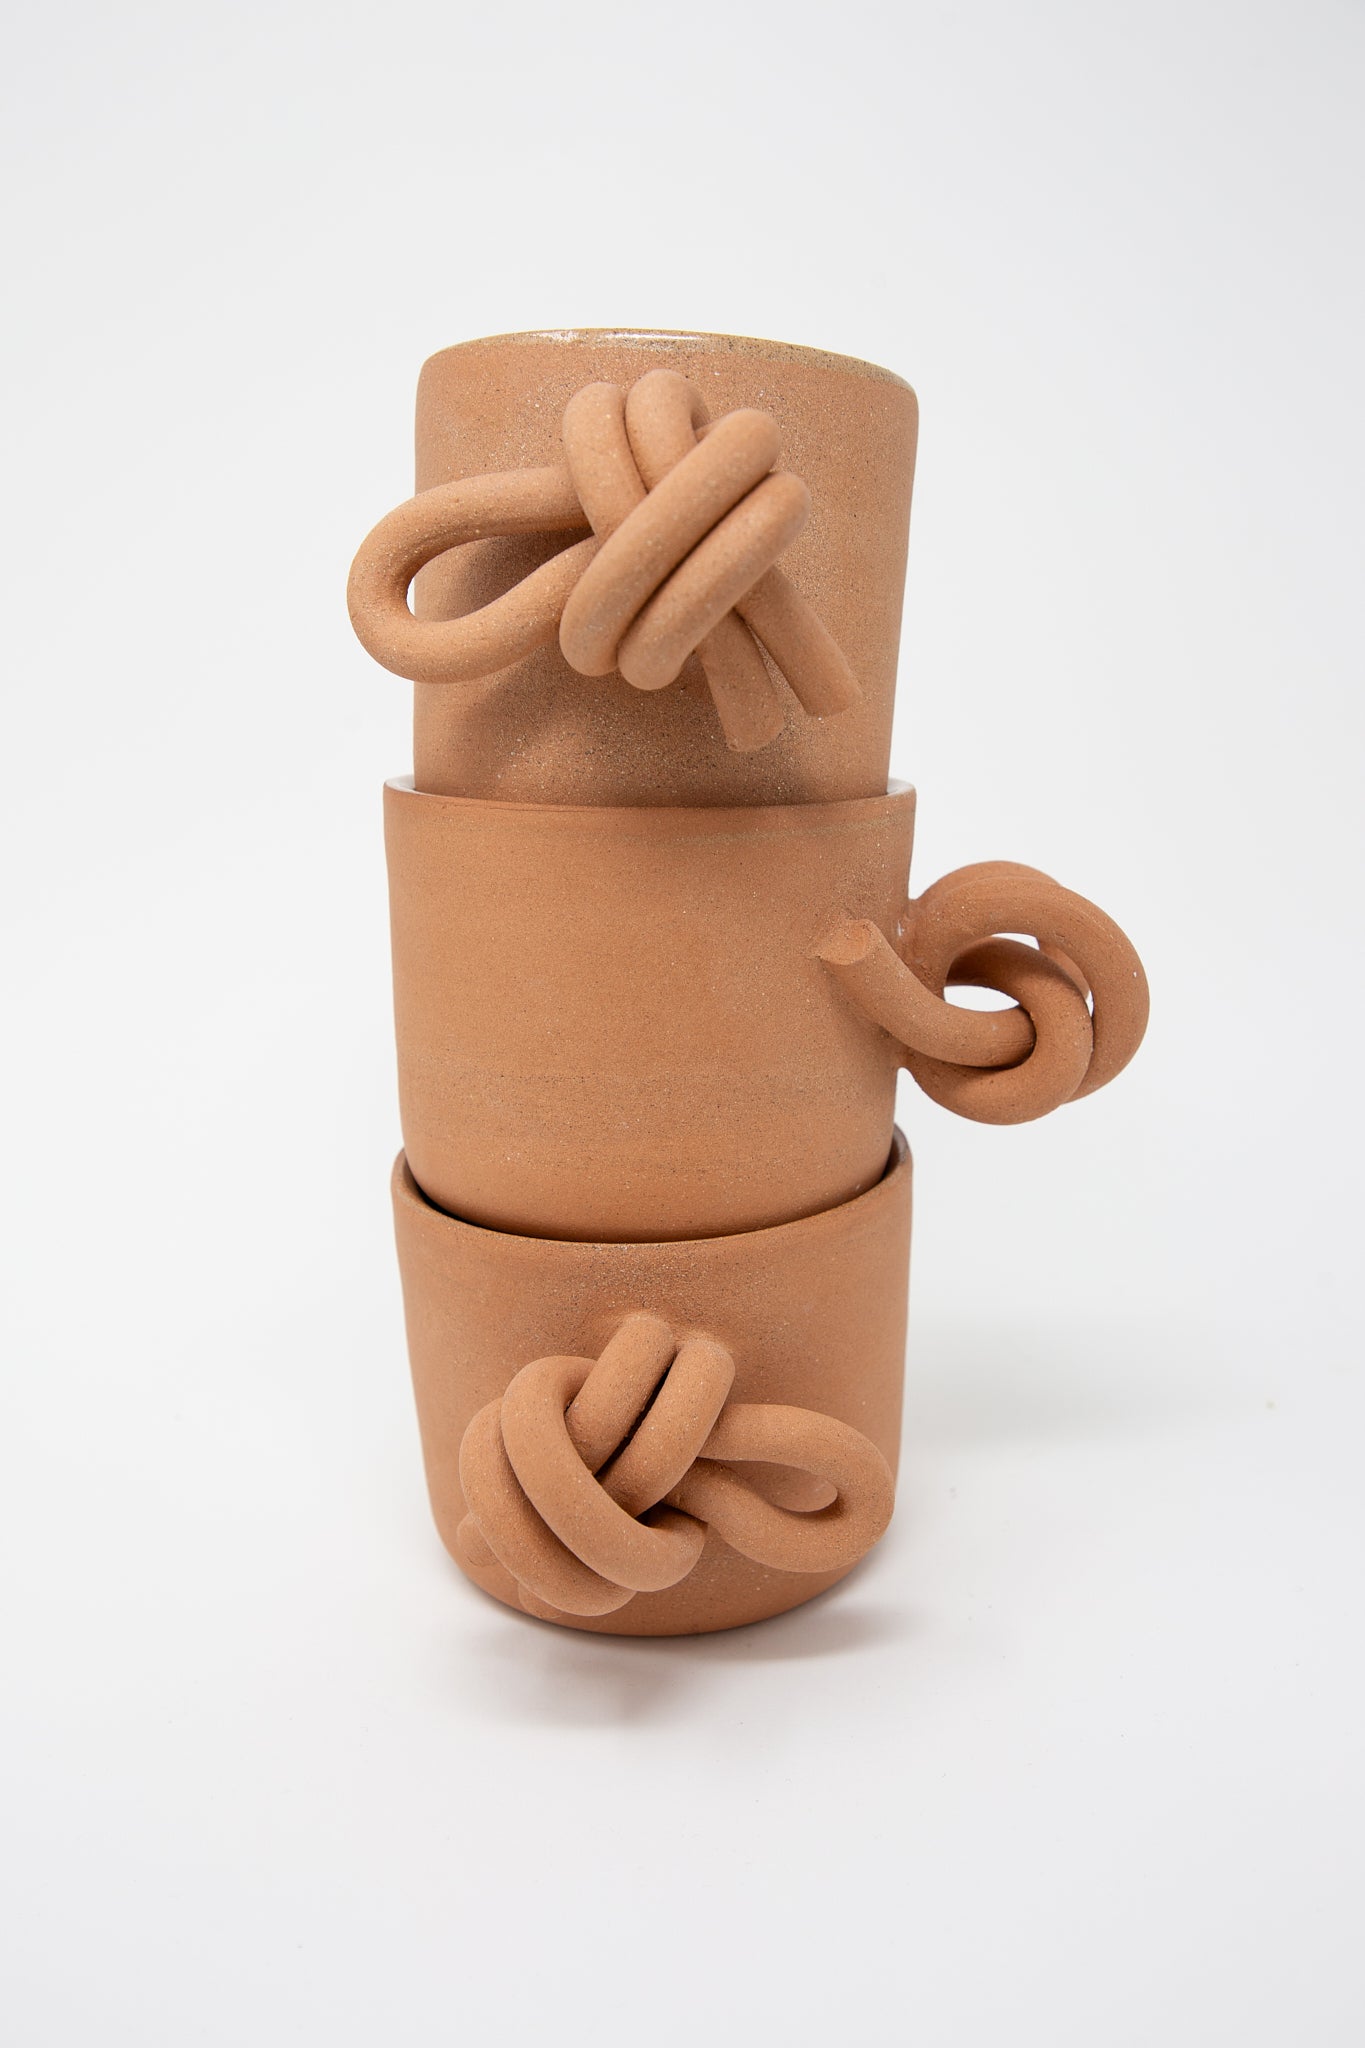 A stack of three Lost Quarry handmade clay pots with knots on them, made from terracotta.